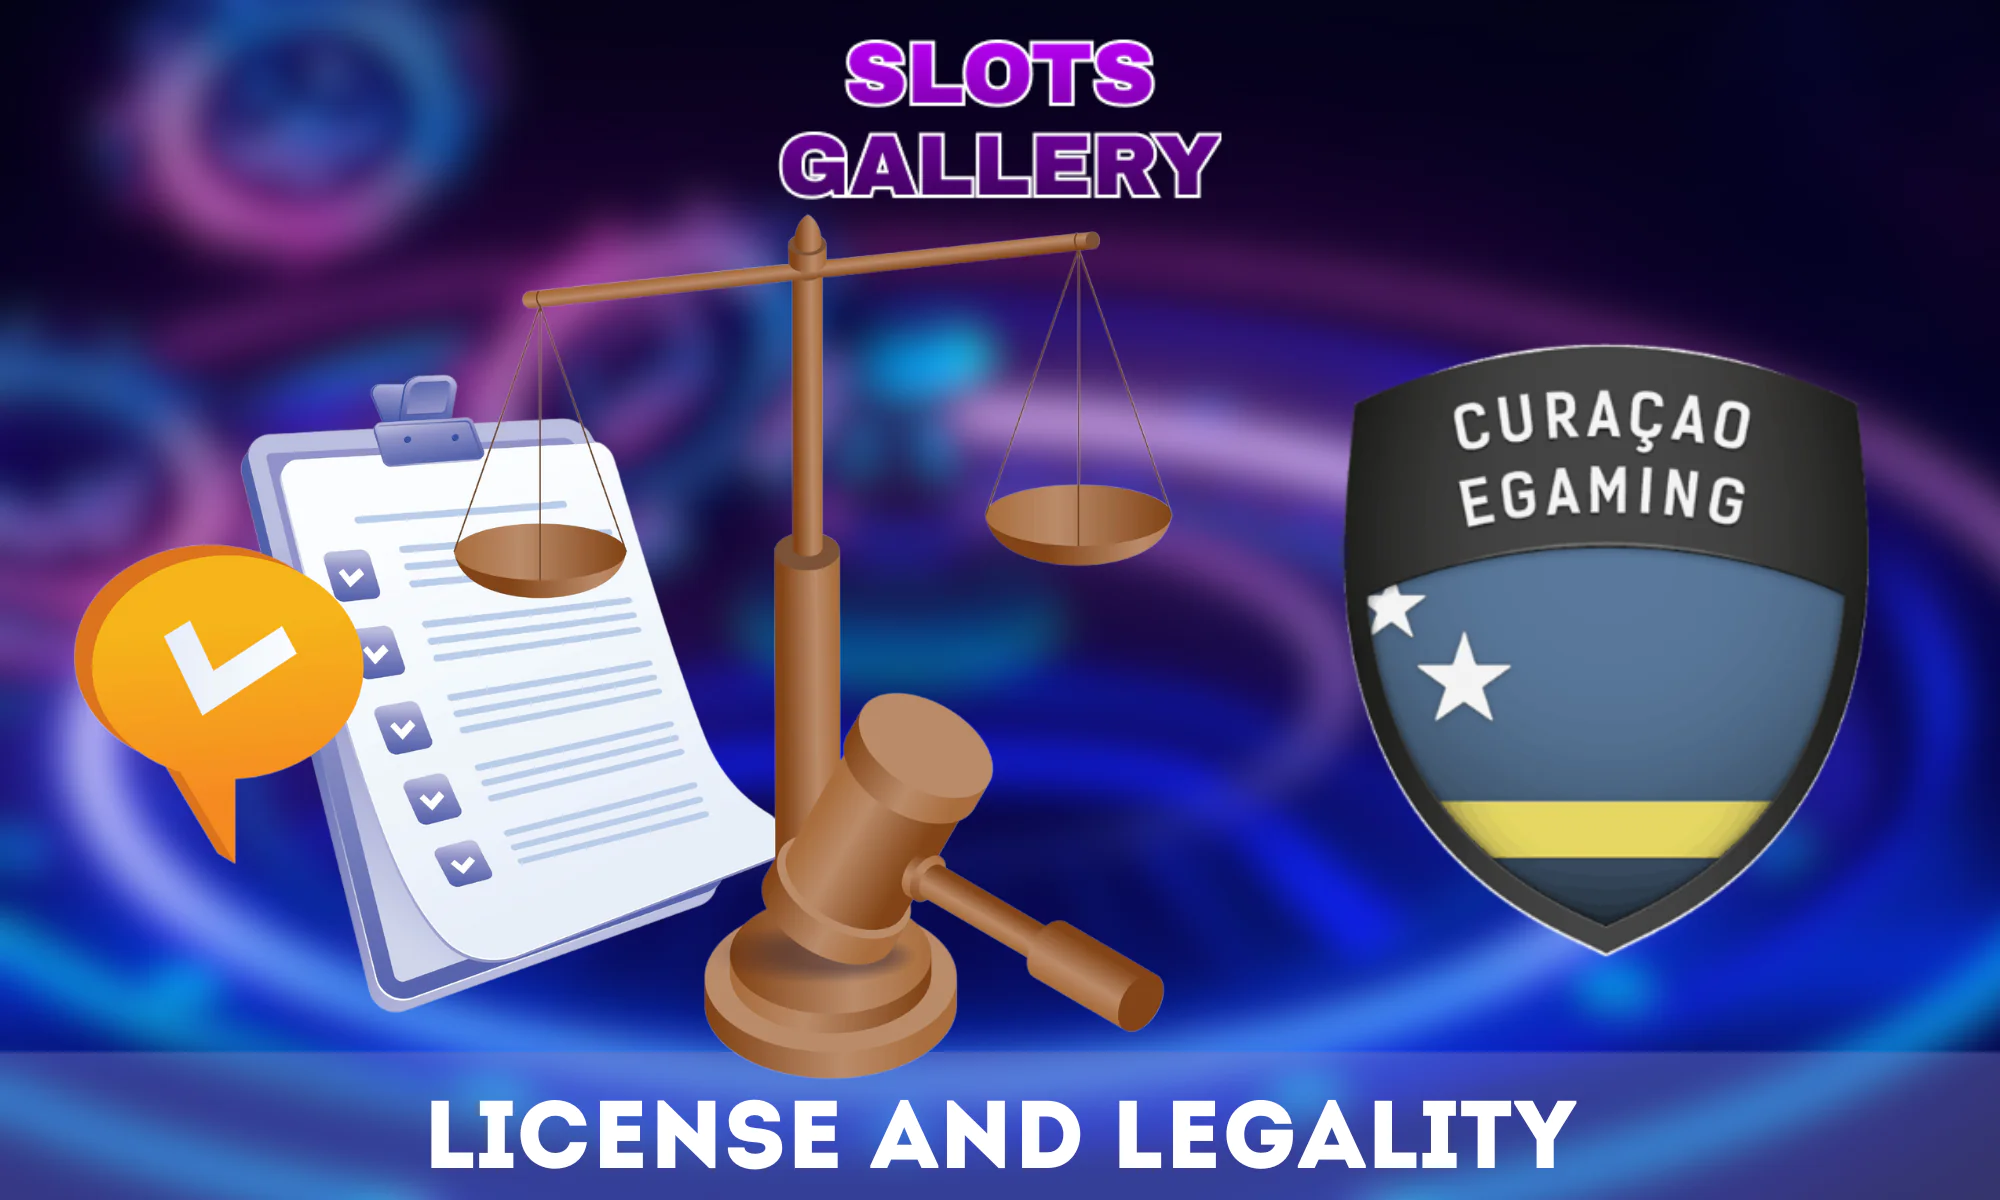 Slots Gallery casino is officially licensed and is responsible for protecting user data